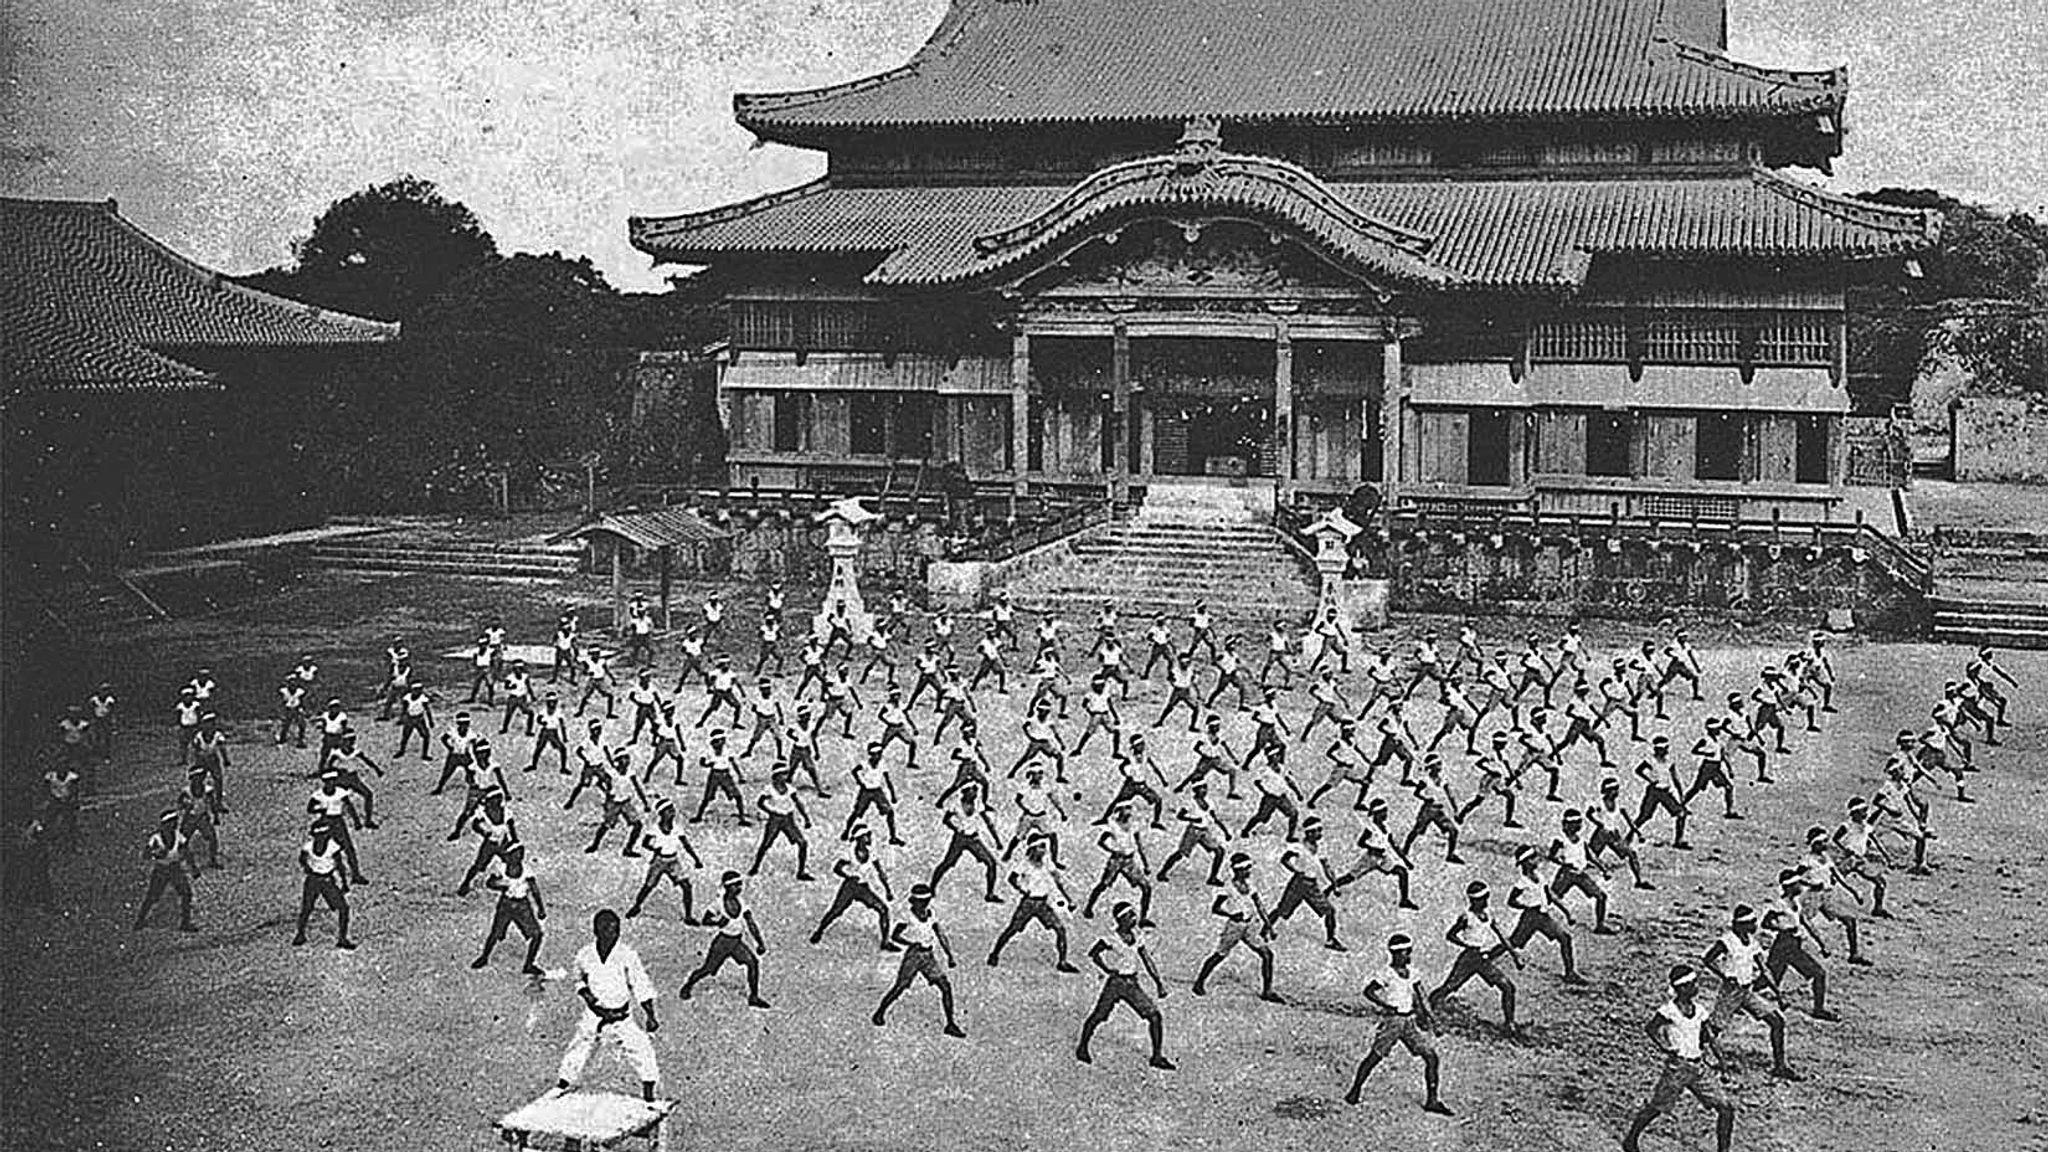 Karate Training in front of Shuri Castle